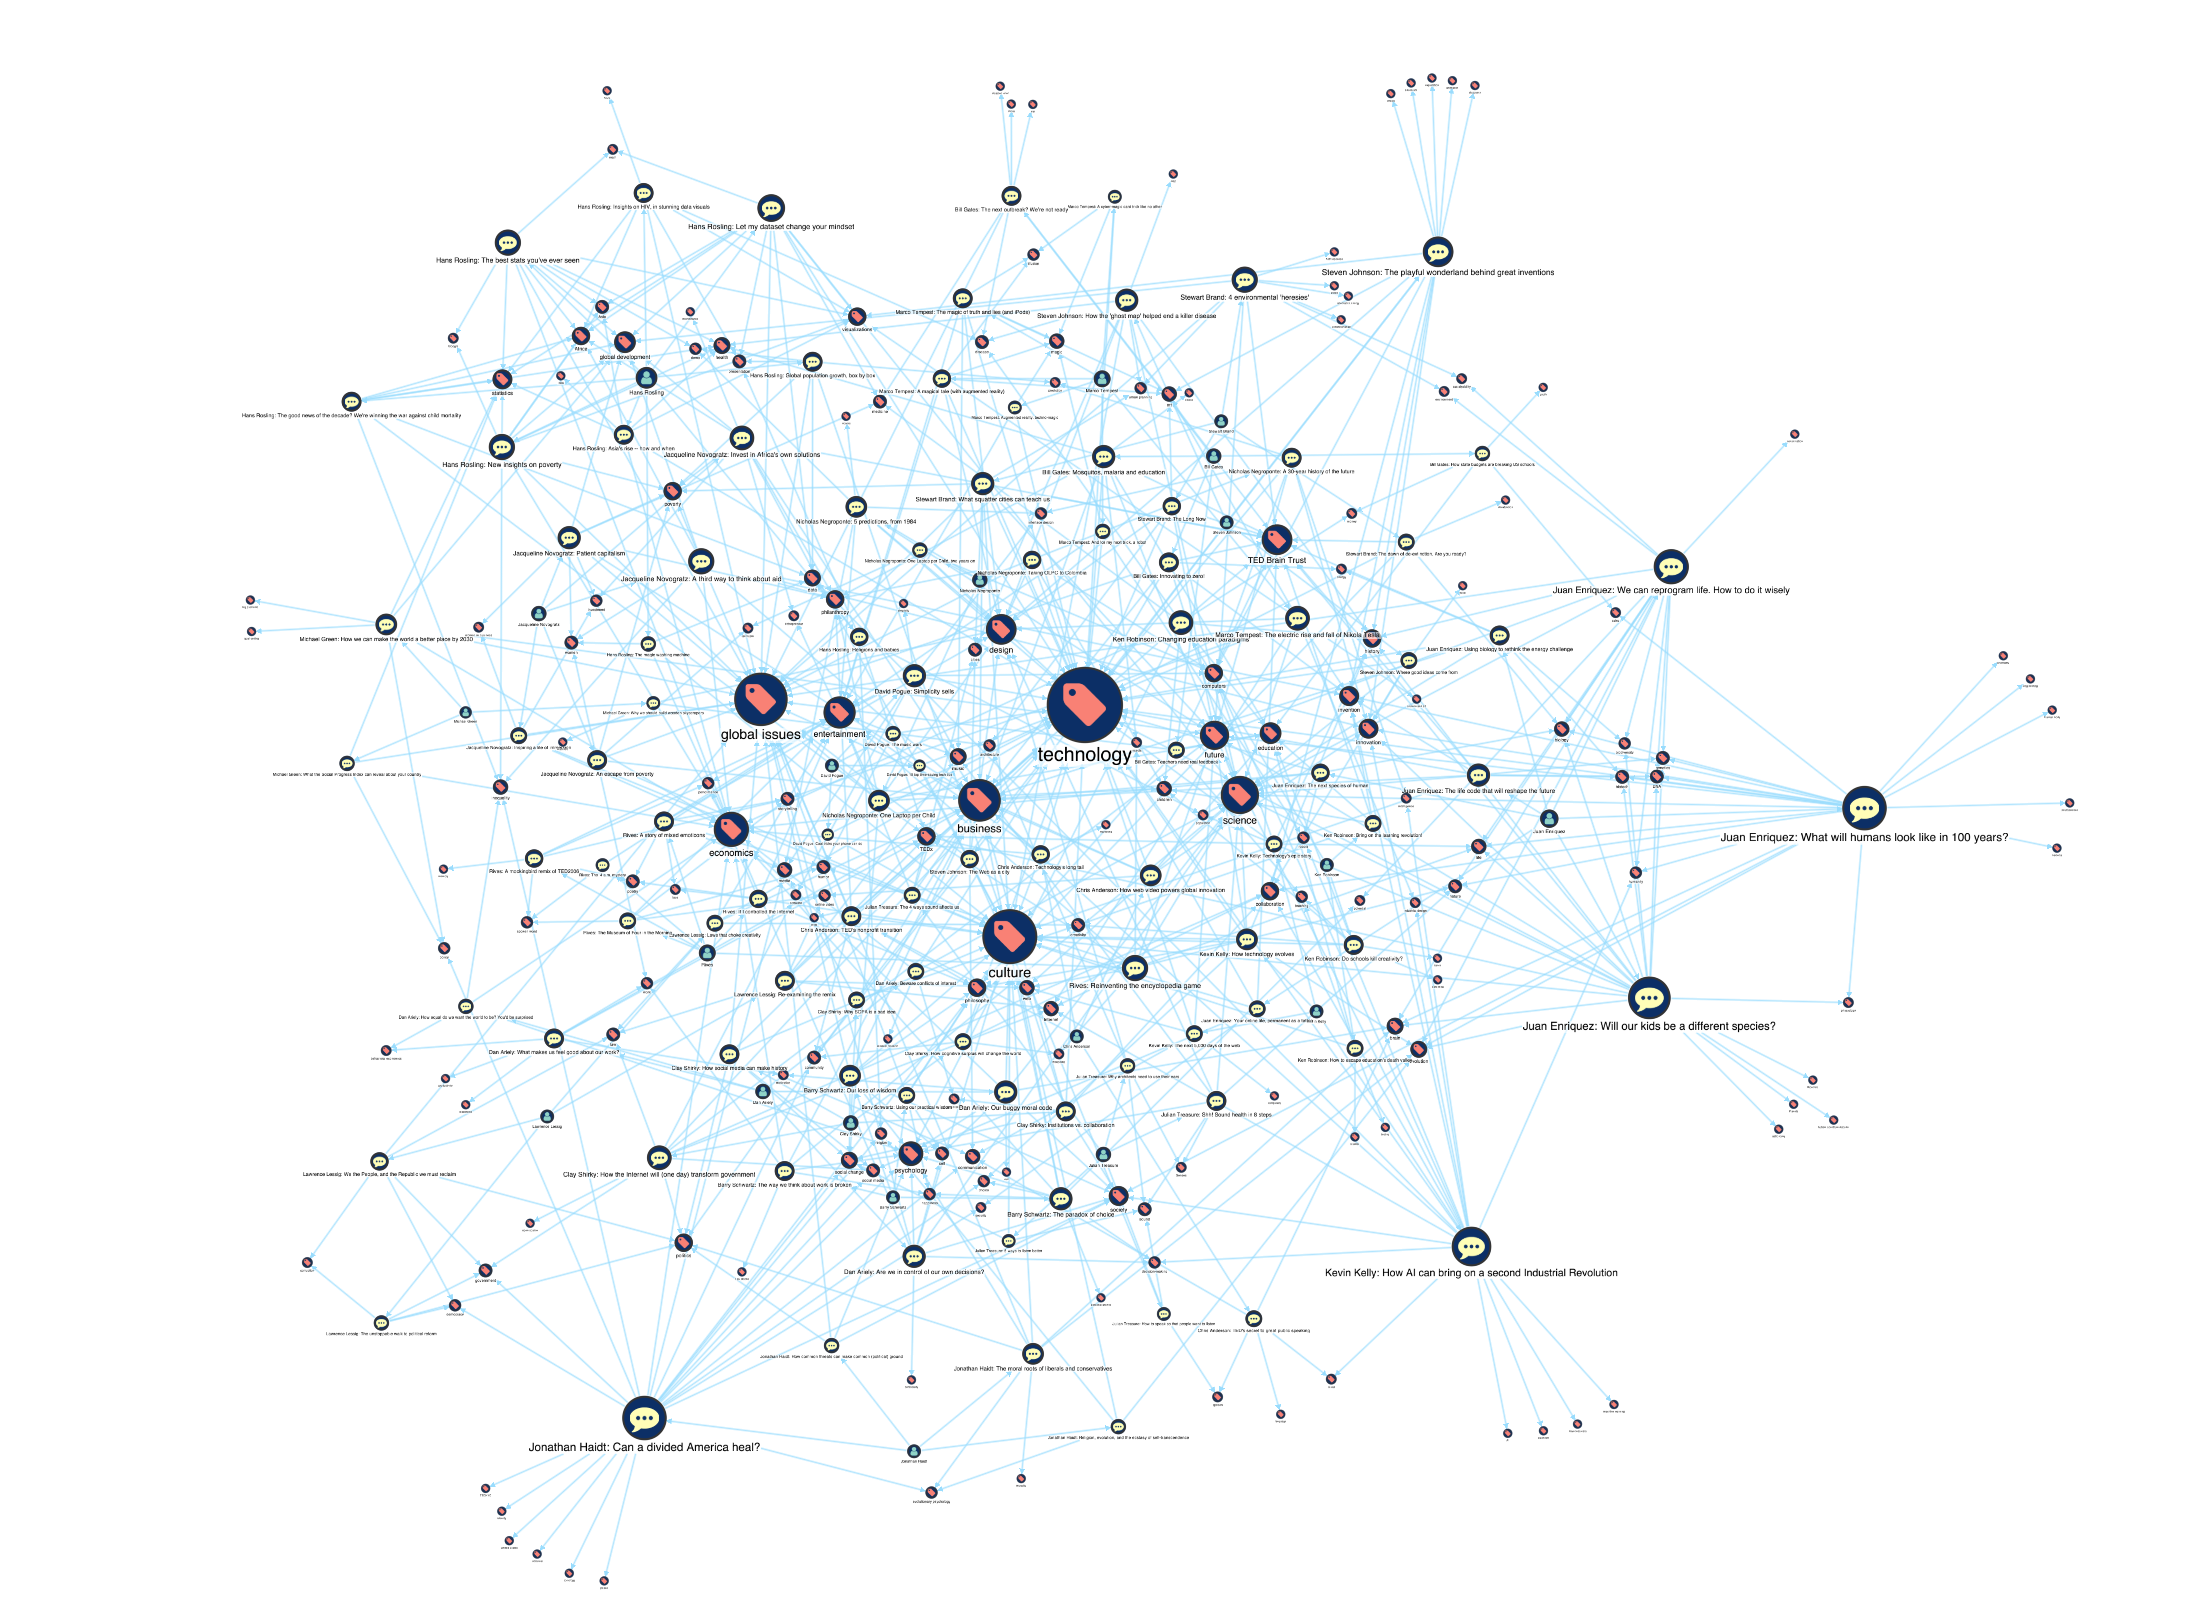 MemGraph visualization tutorial - Individual nodes sized by PageRank reveal popular keywords